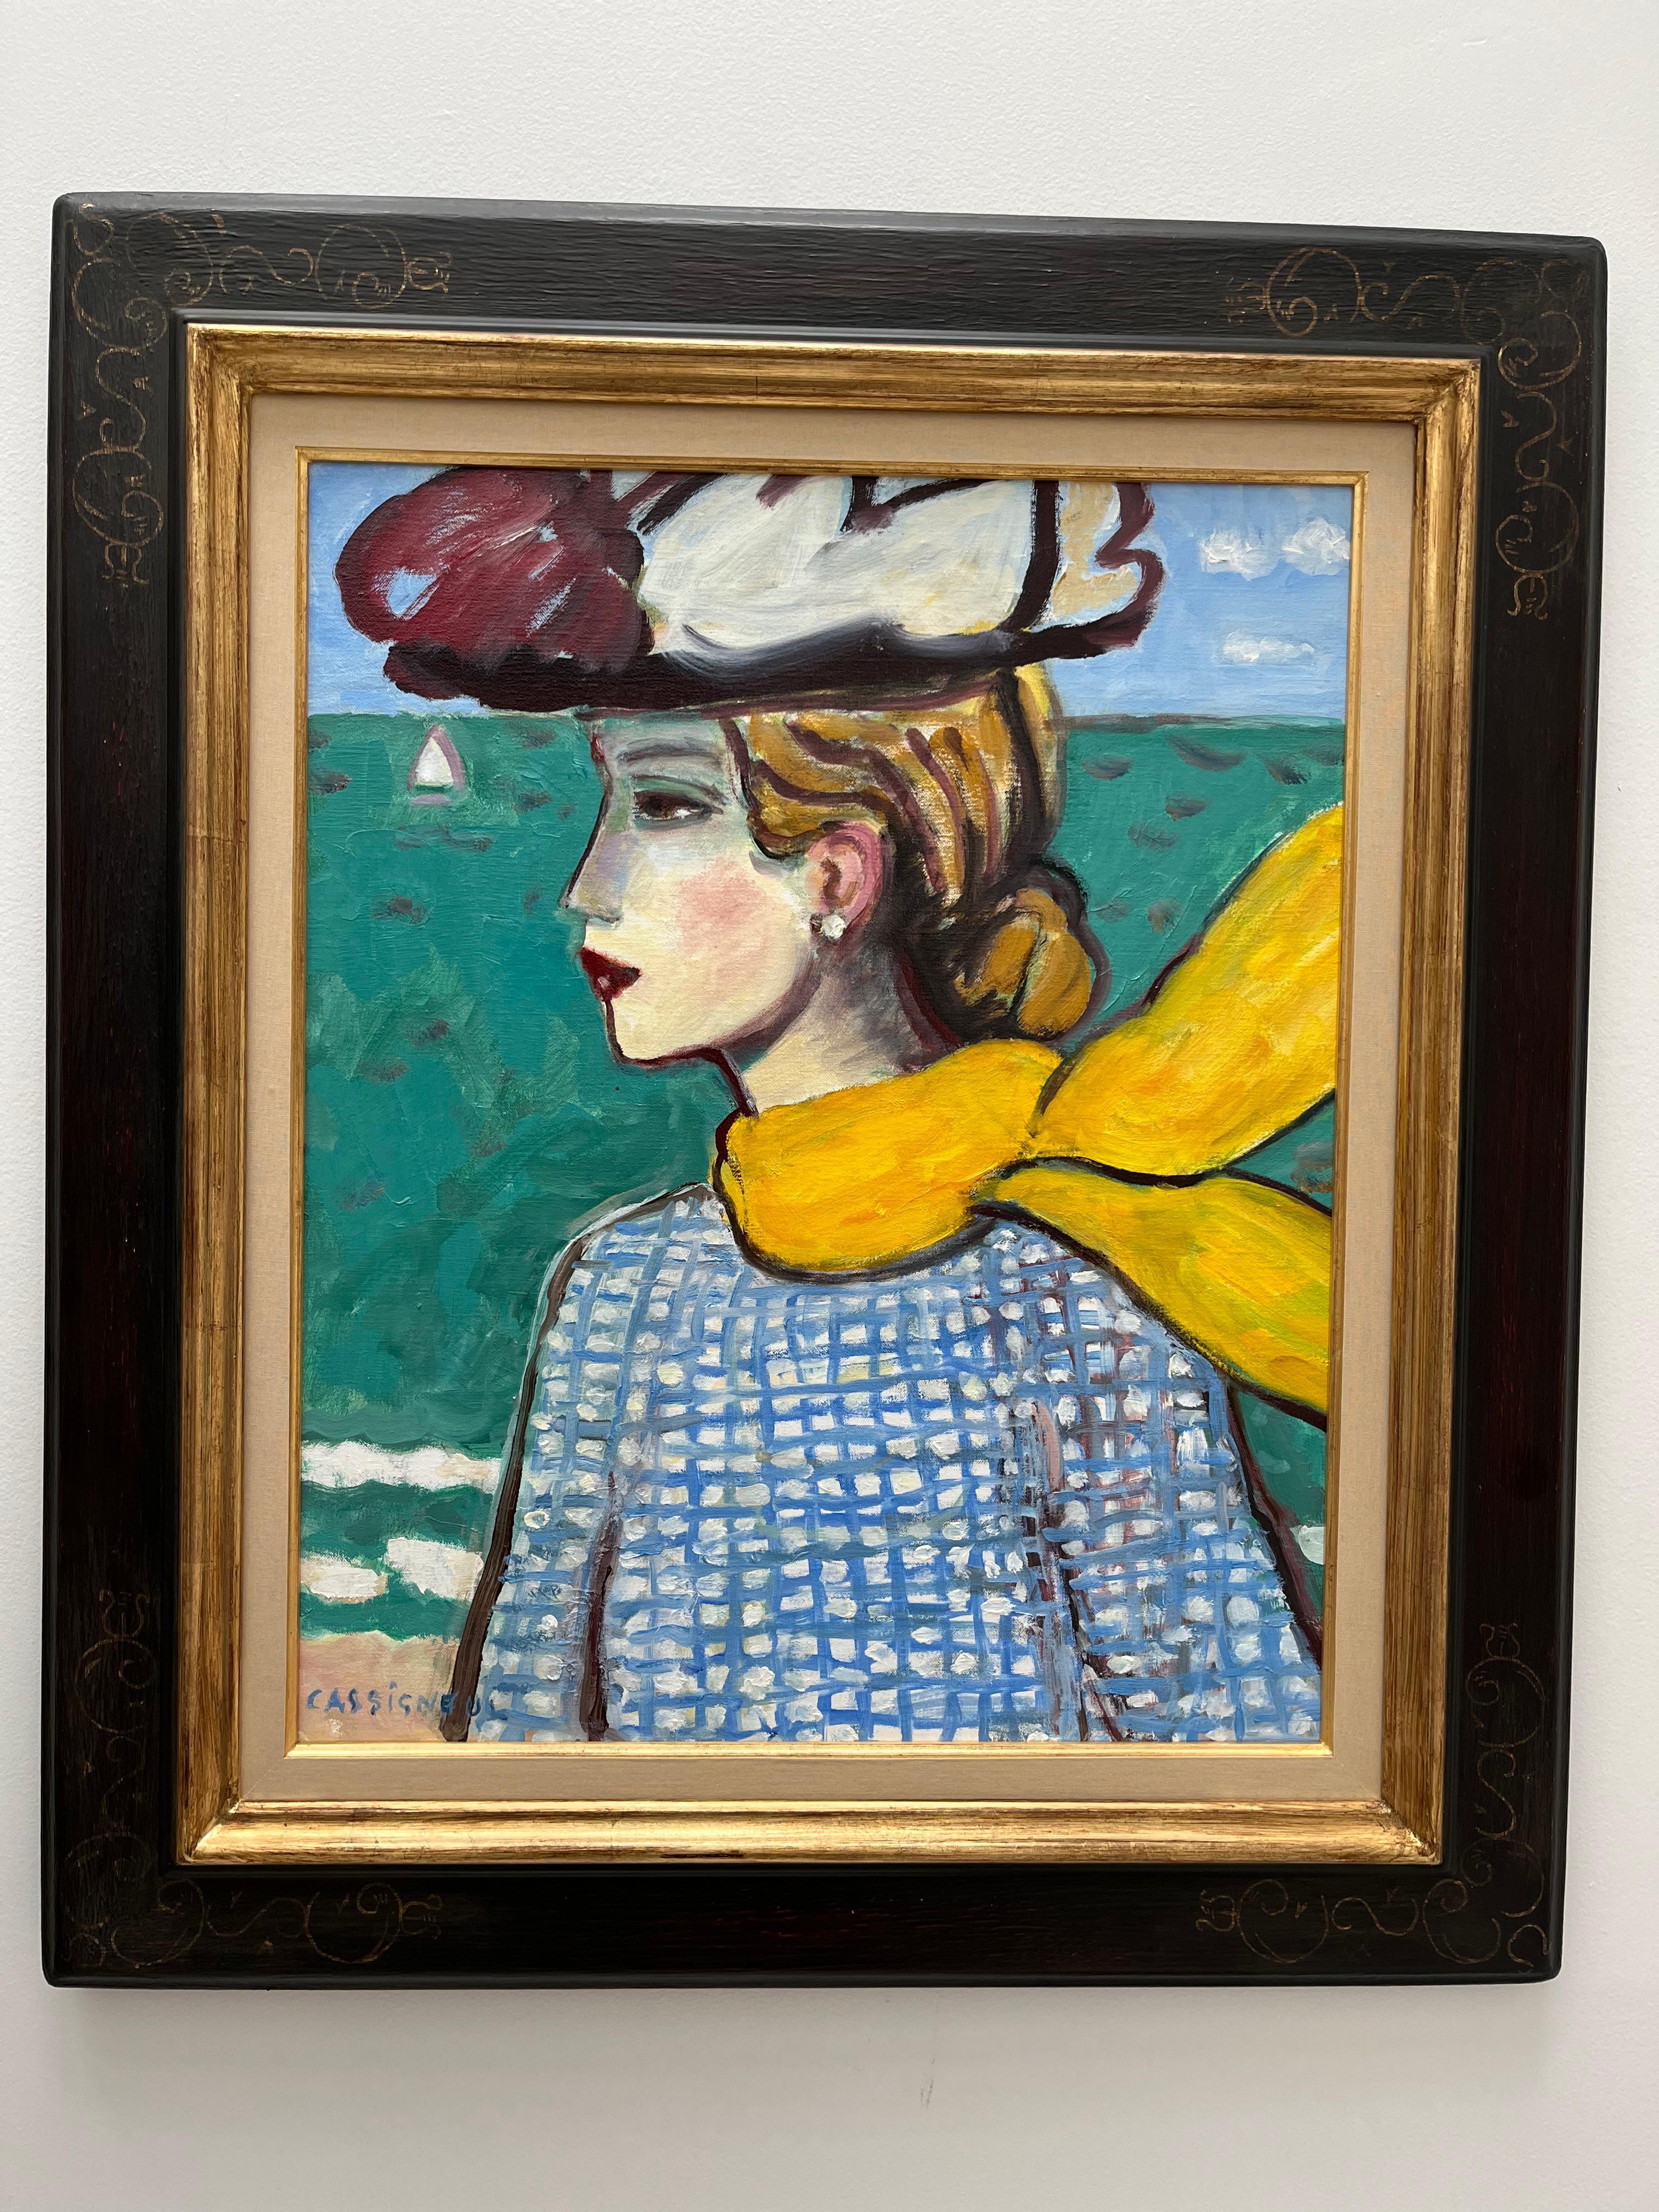 Woman with Yellow Scarf    ( L'echarpe jaune) - Painting by Jean-Pierre Cassigneul